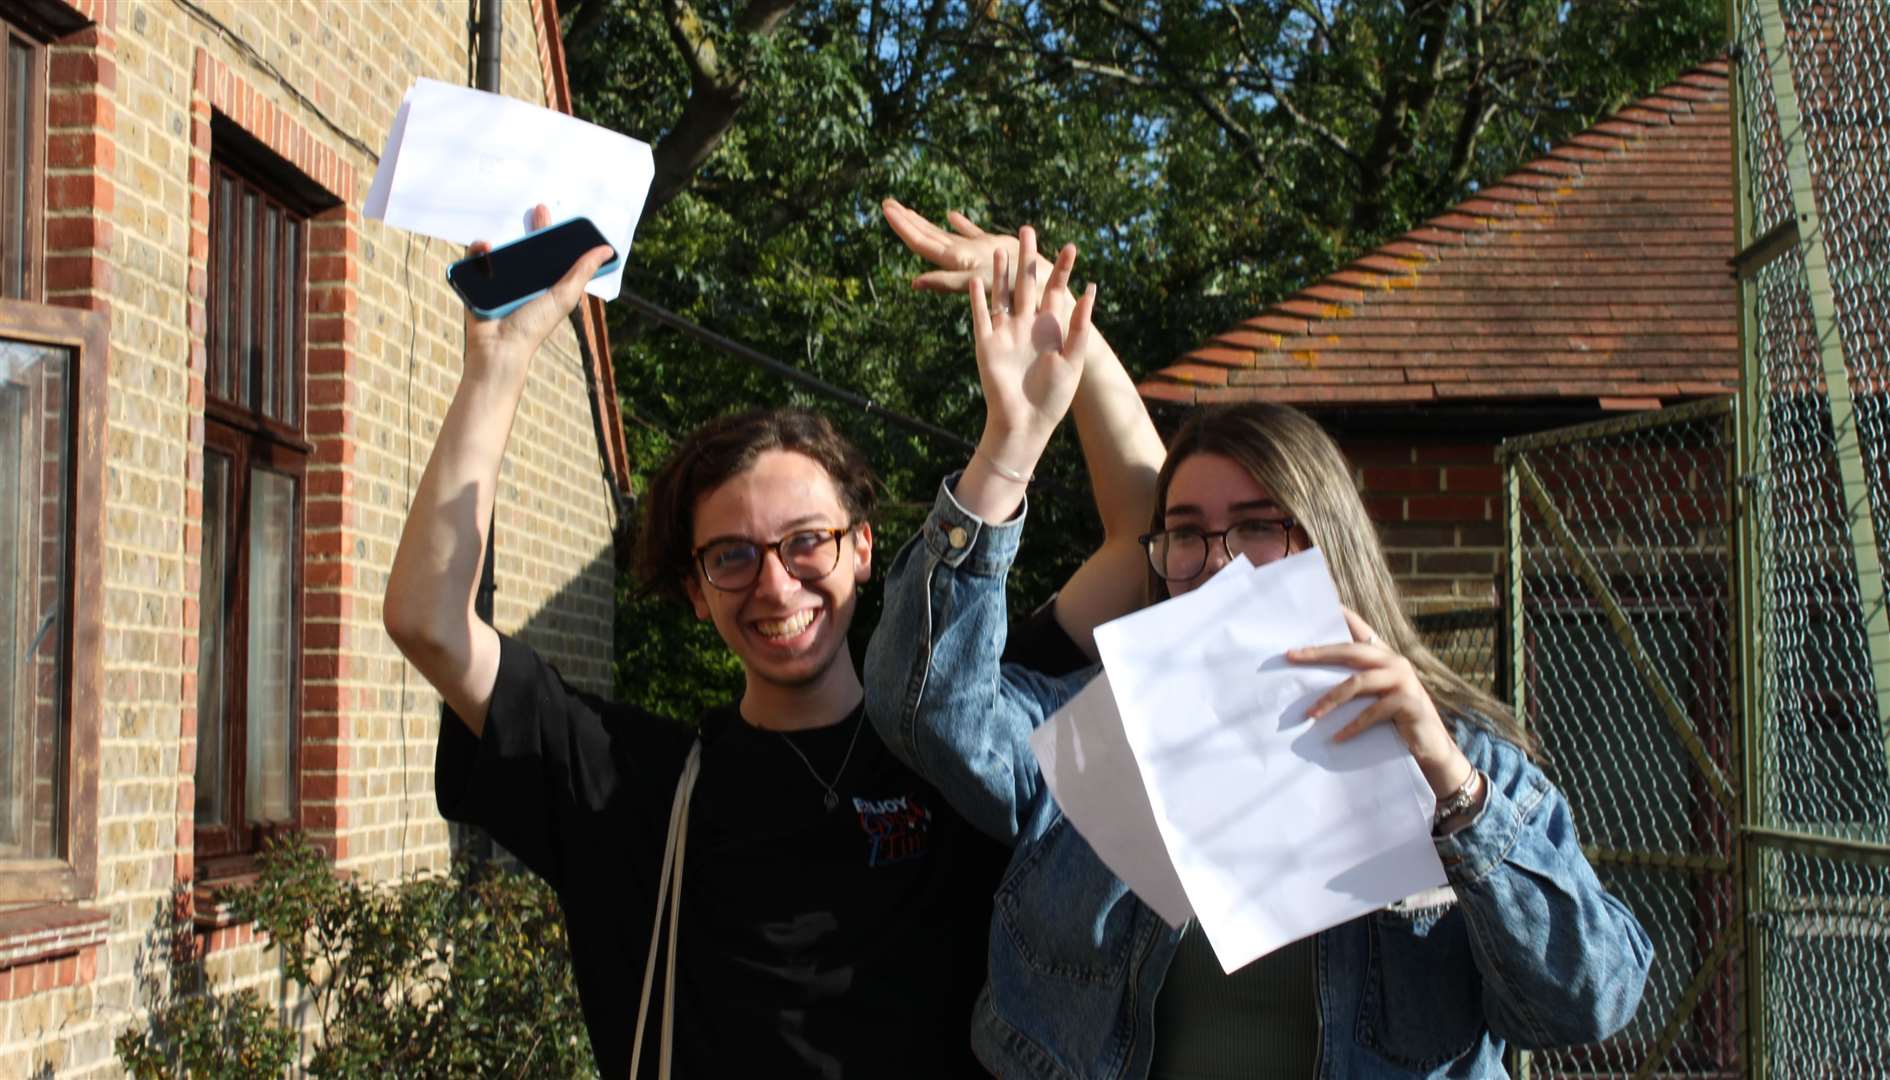 Students at Ursuline College in Thanet celebrate receiving their A-level and BTEC results